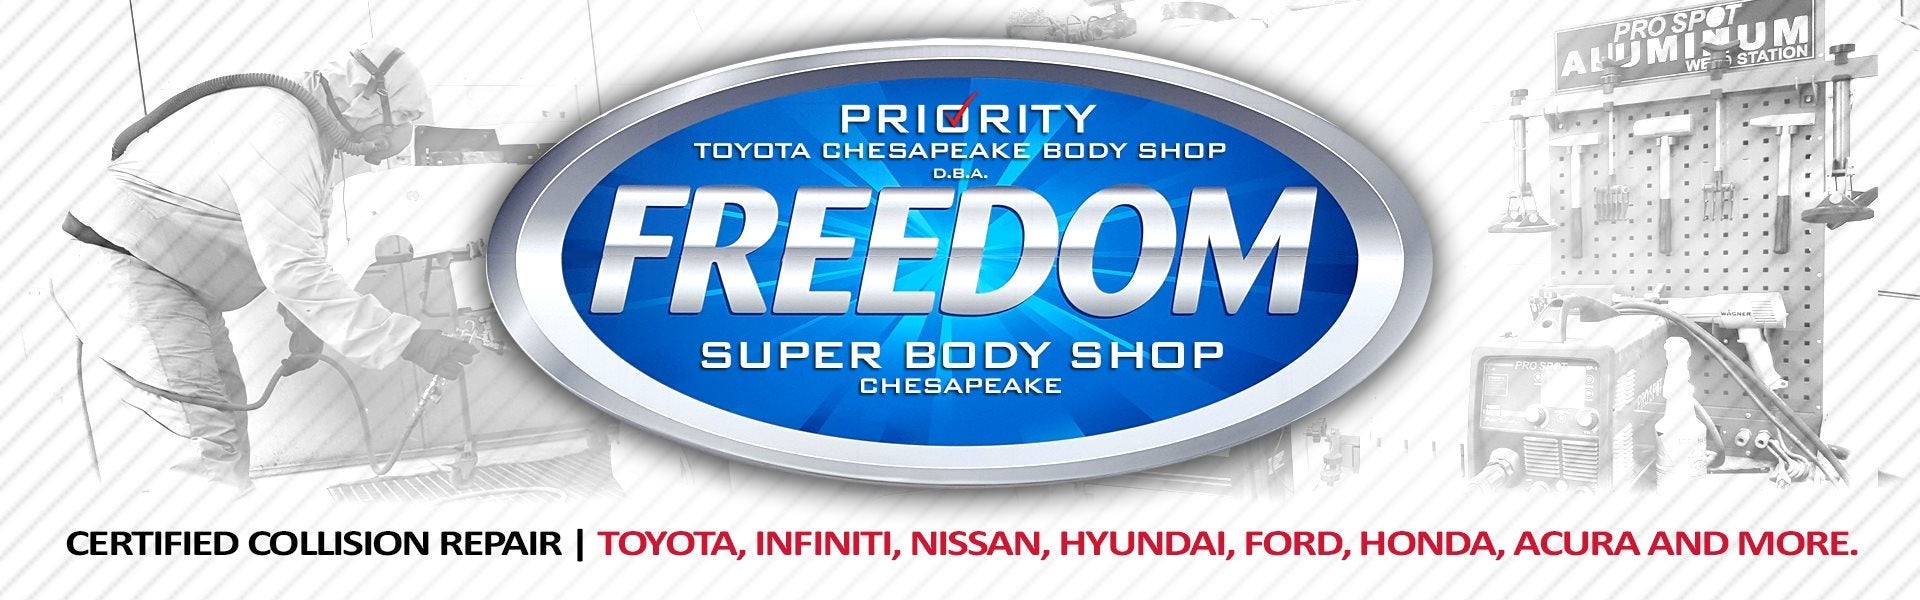 Chesapeake Freedom Body Shop | Priority Auto Collision in Colonial Heights VA